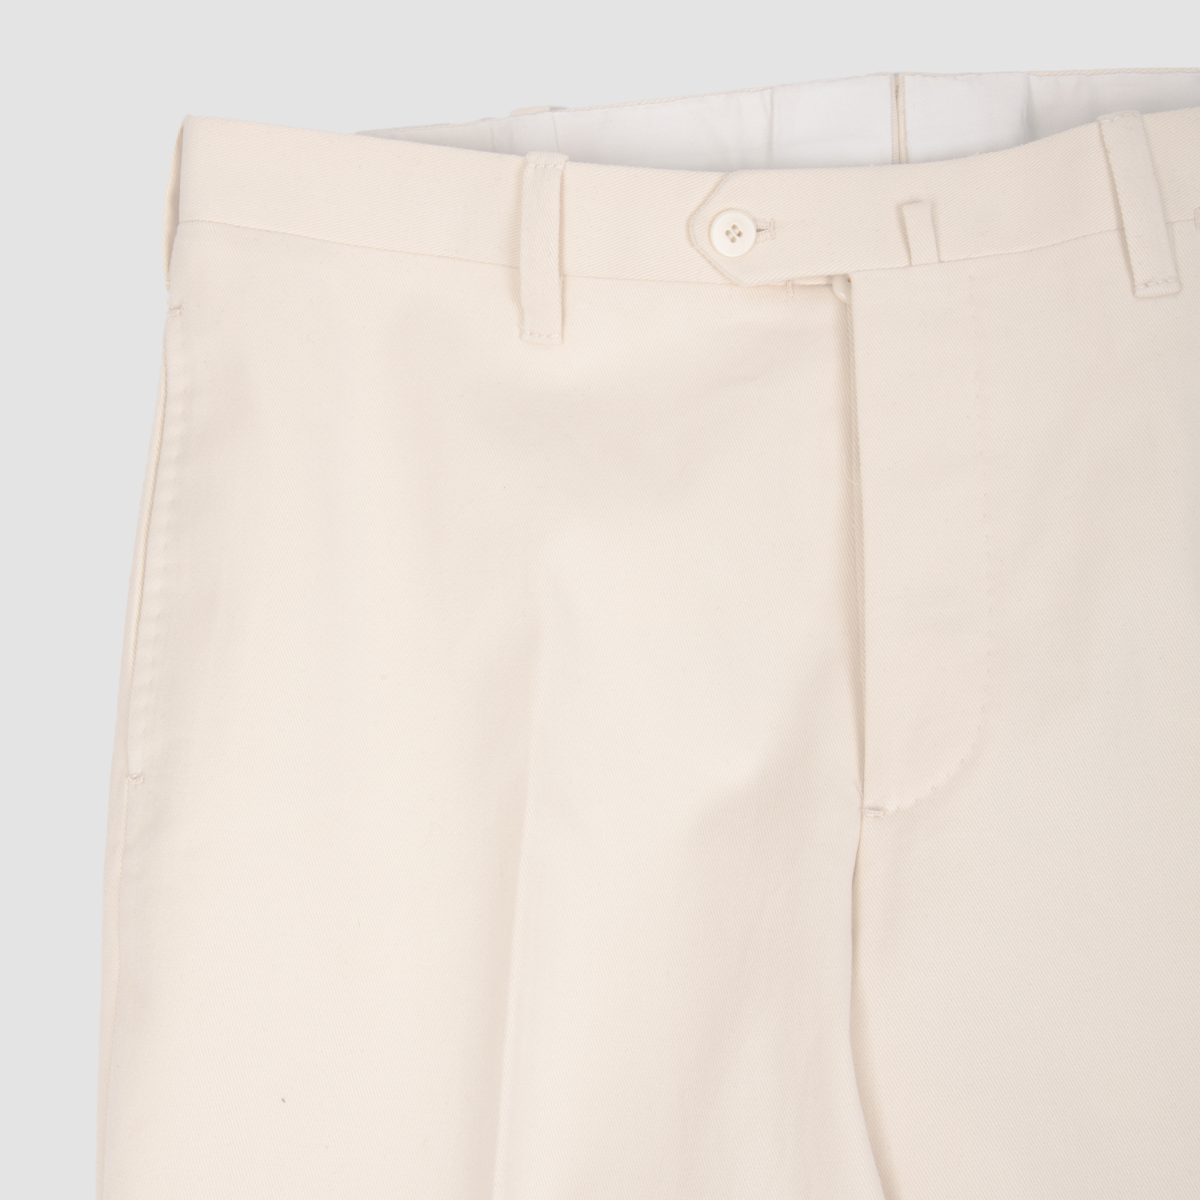 Woven Taylor Made Cream Trouser